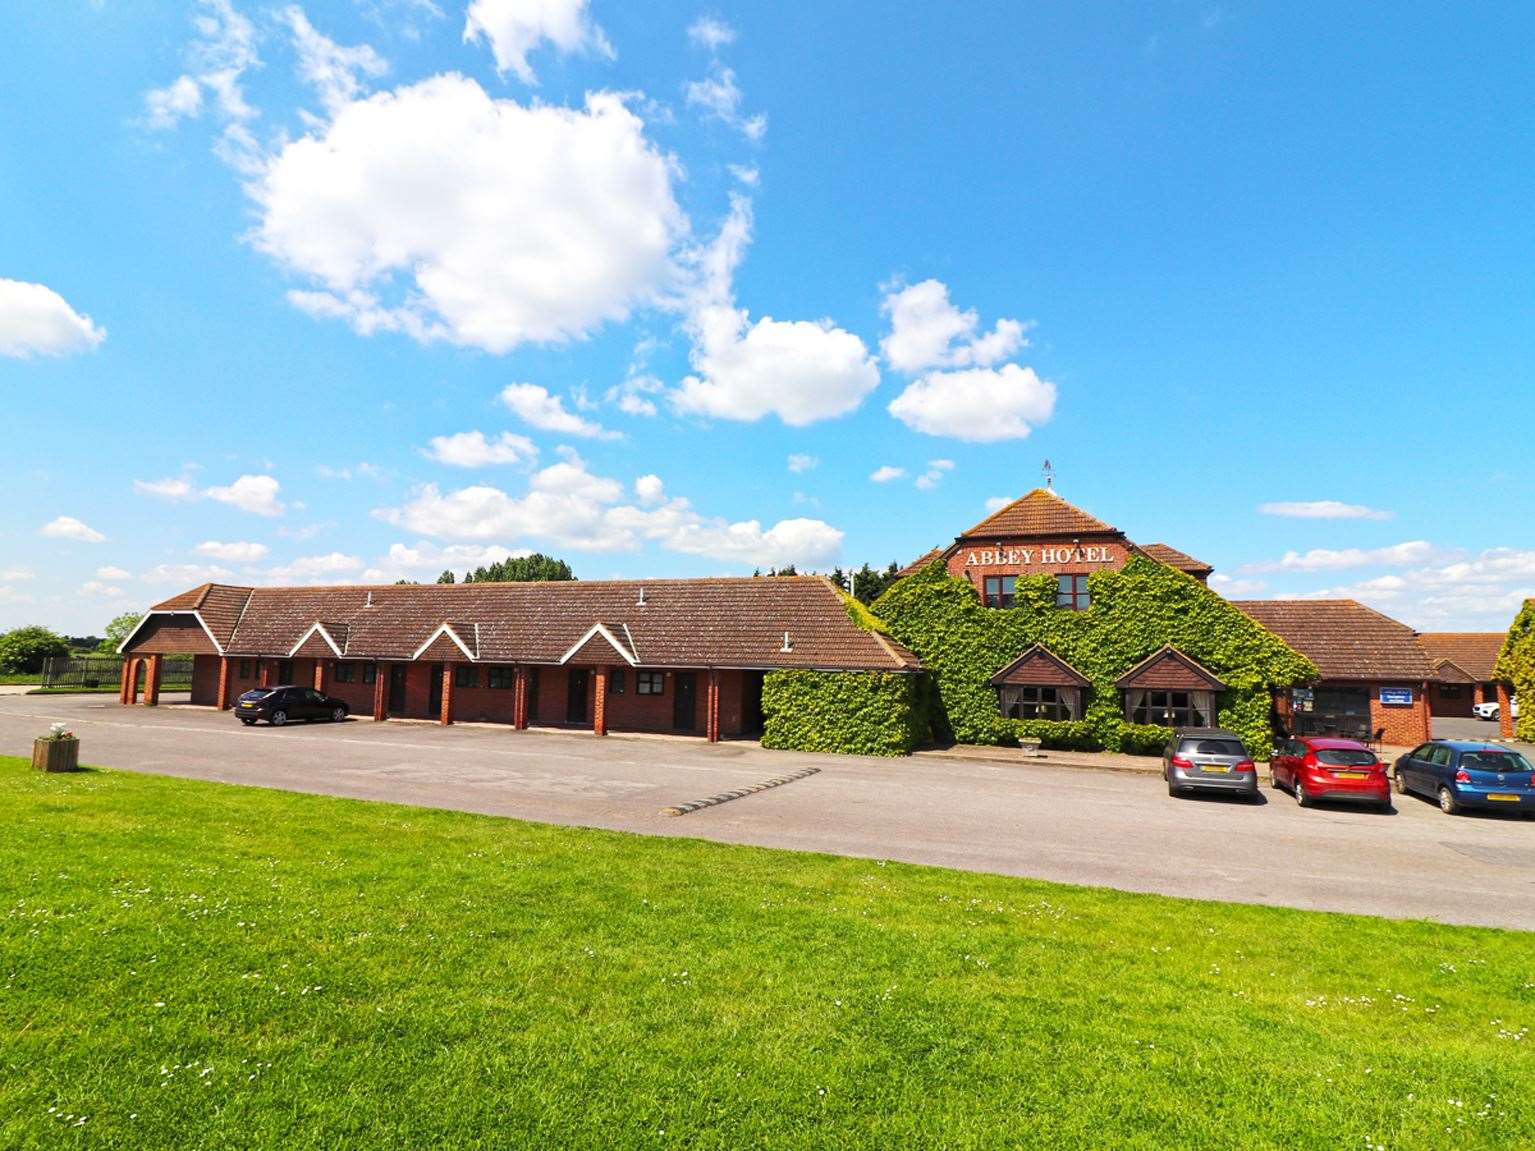 Abbey Hotel on Sheppey is on the market